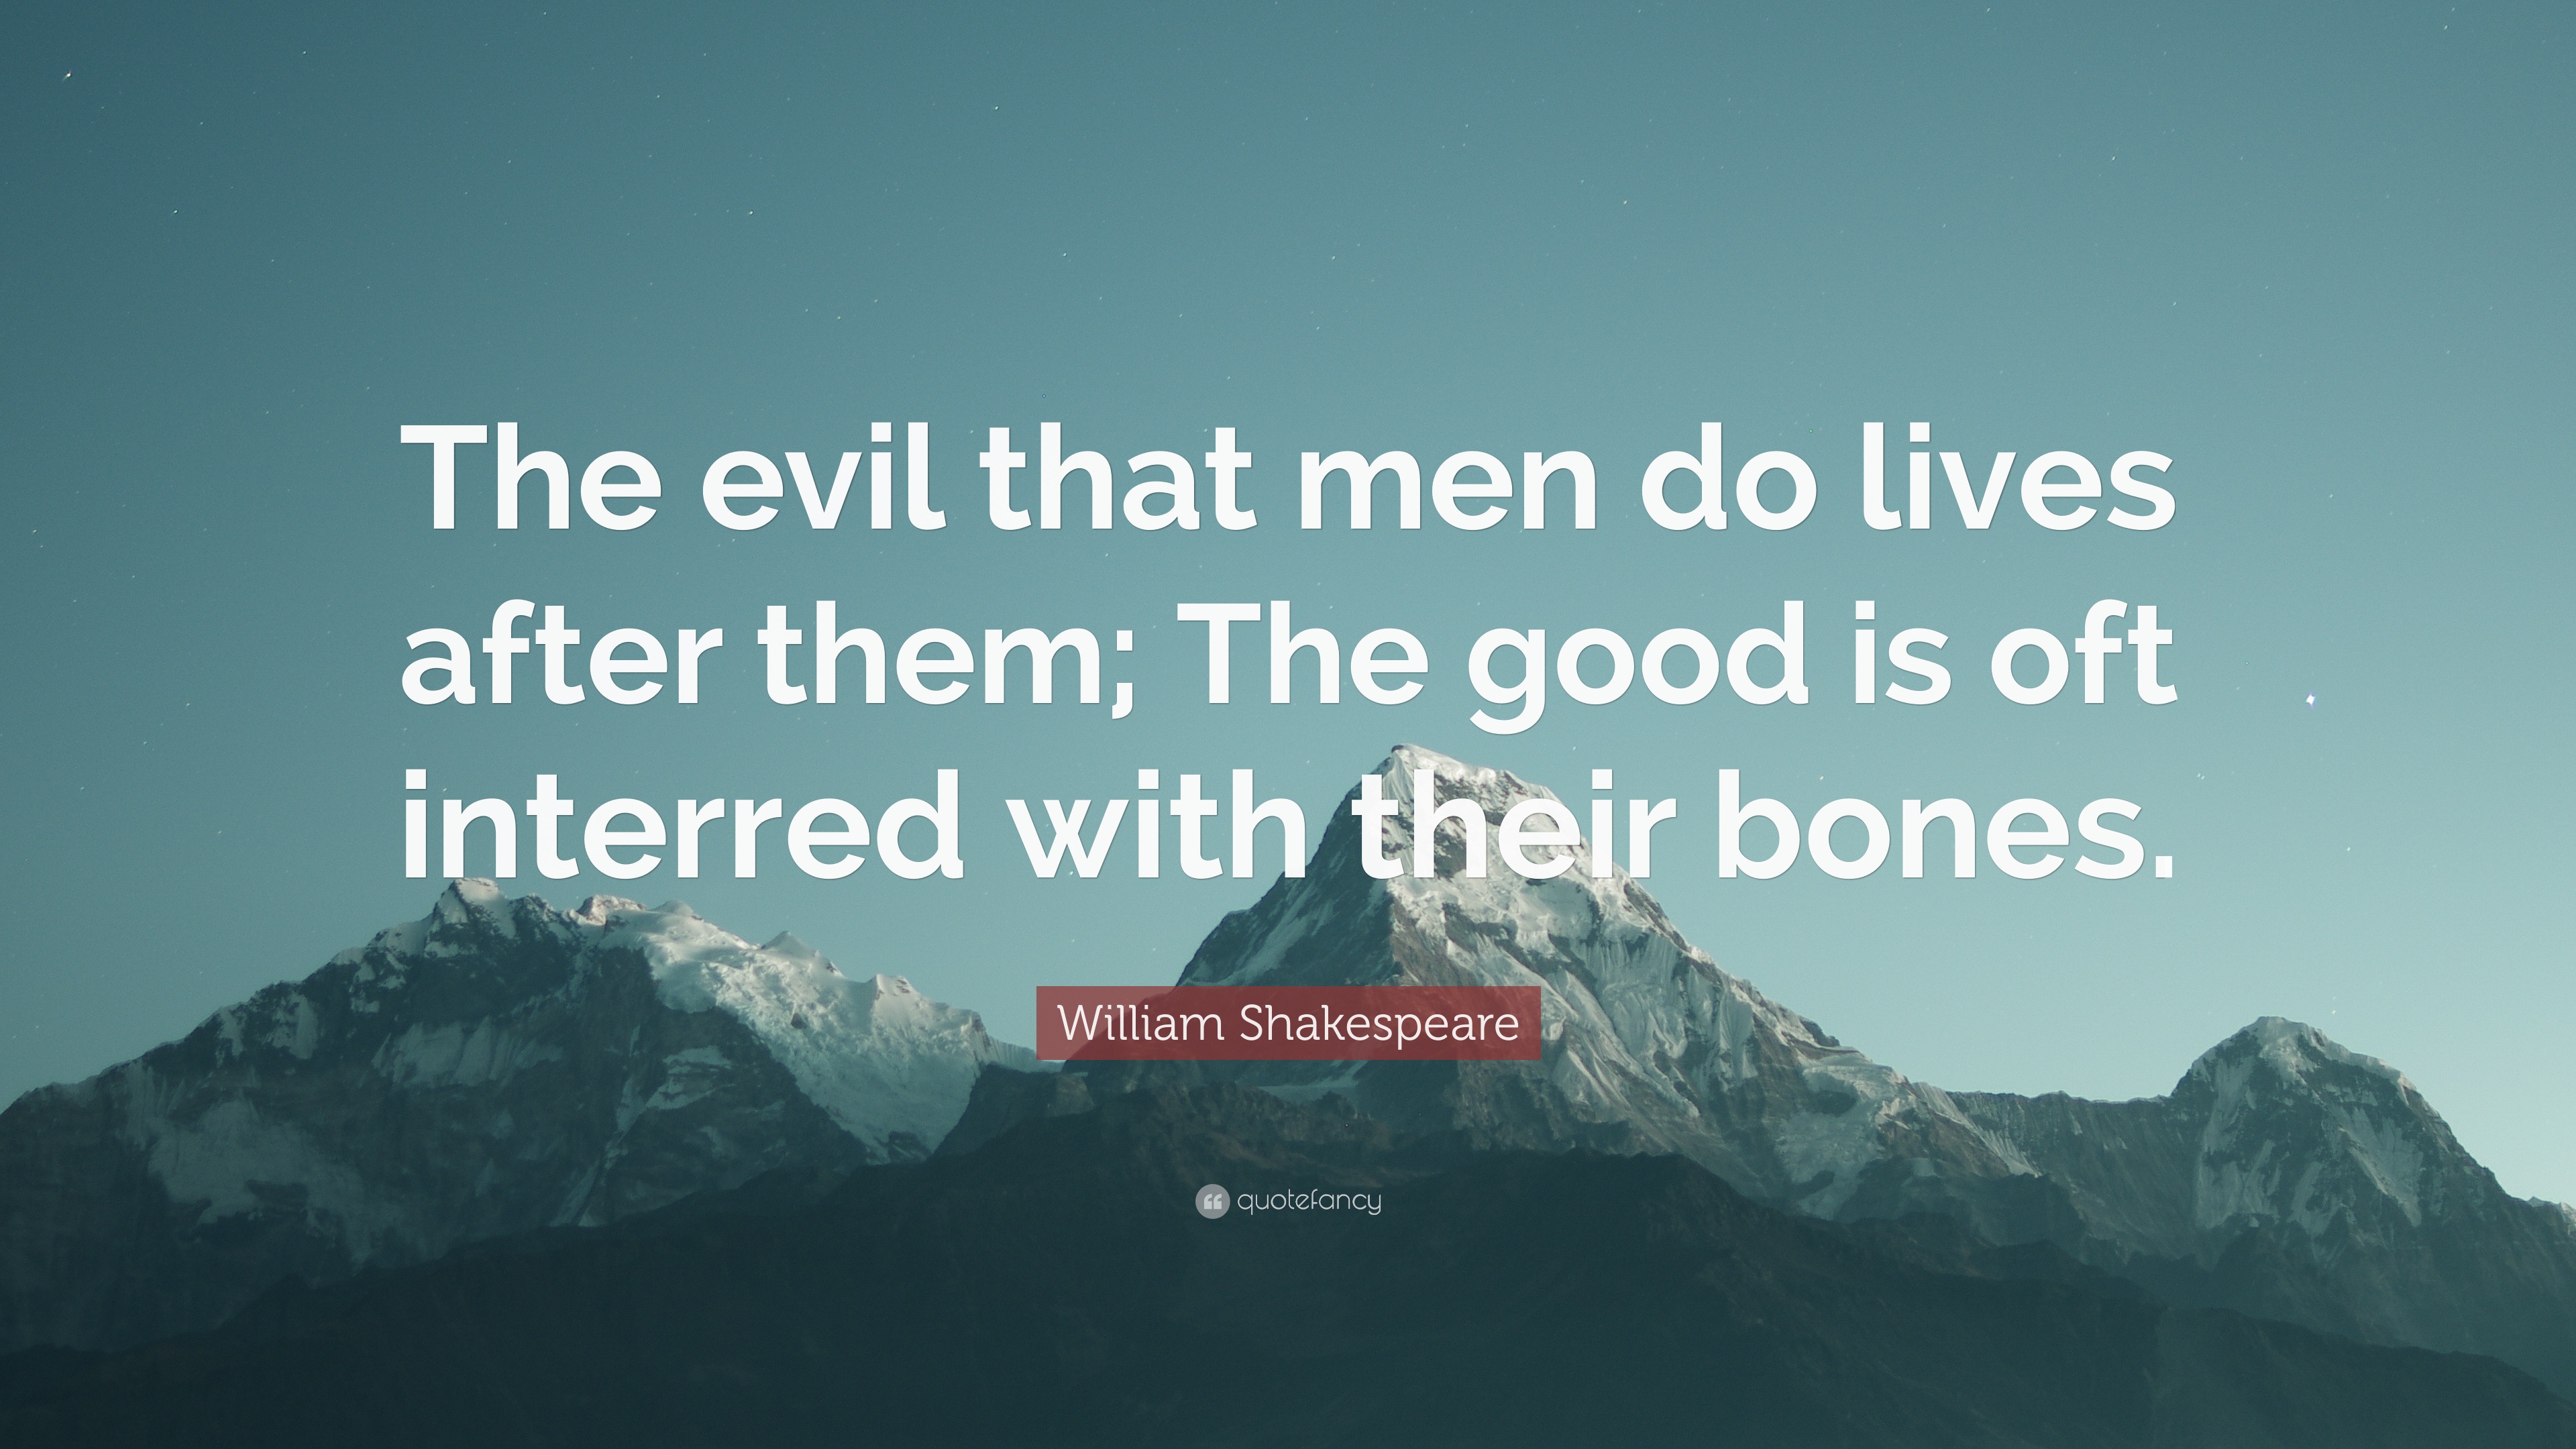 William Shakespeare Quote: “The evil that men do lives after them; The good  is oft interred